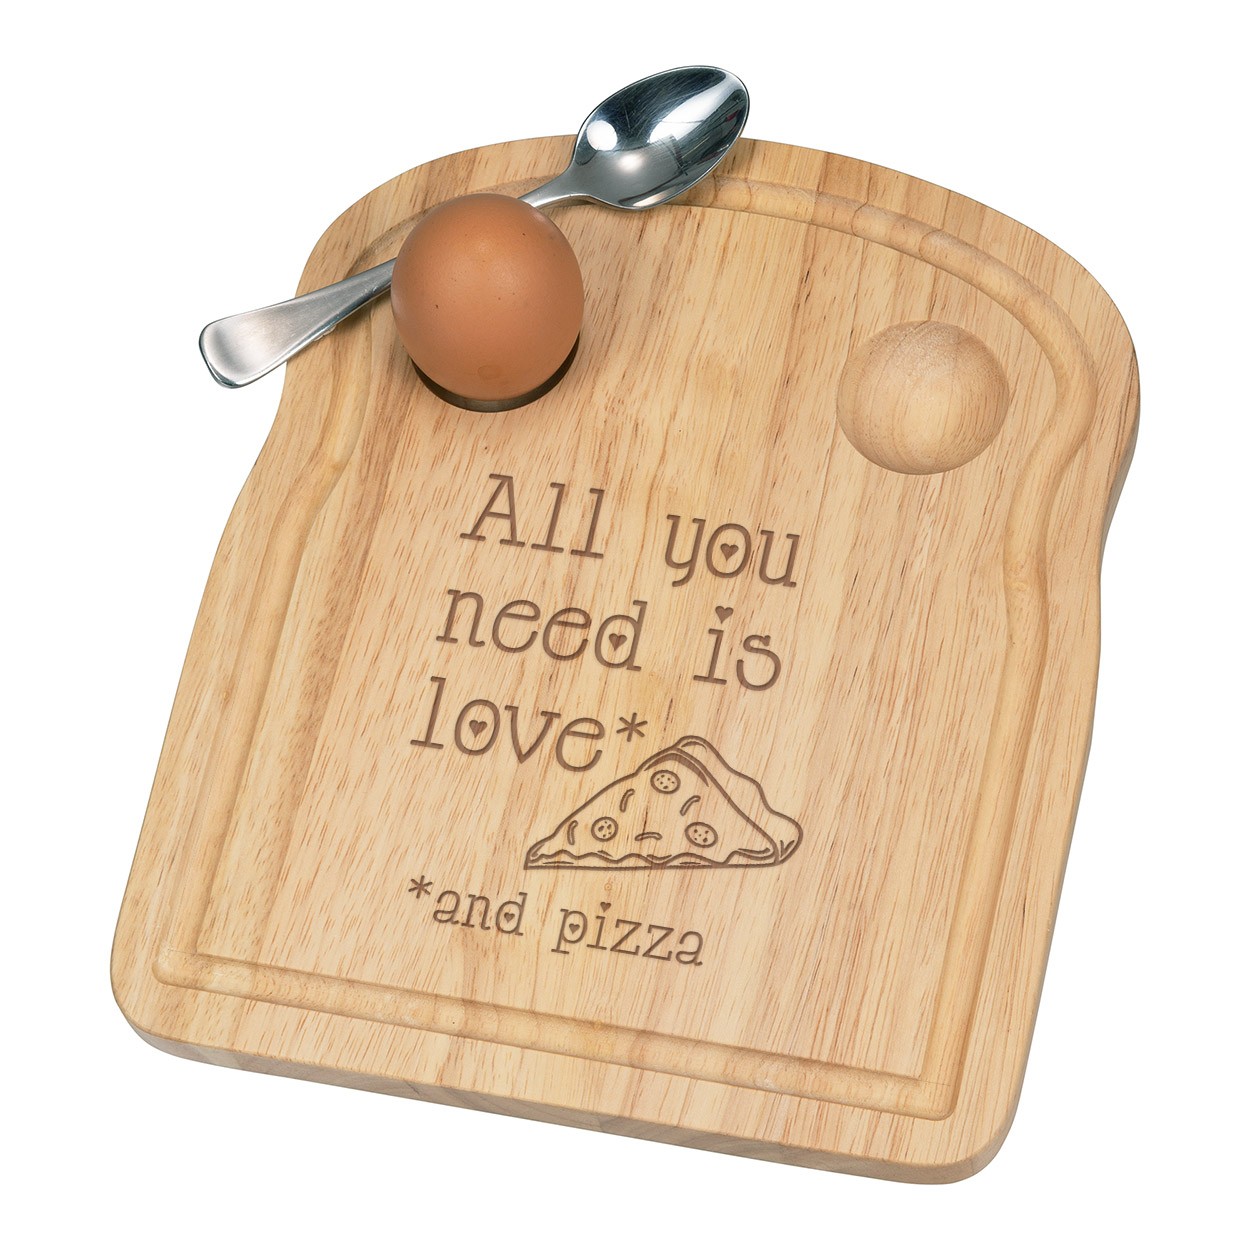 All You Need Is Love And Pizza Breakfast Dippy Egg Cup Board Wooden